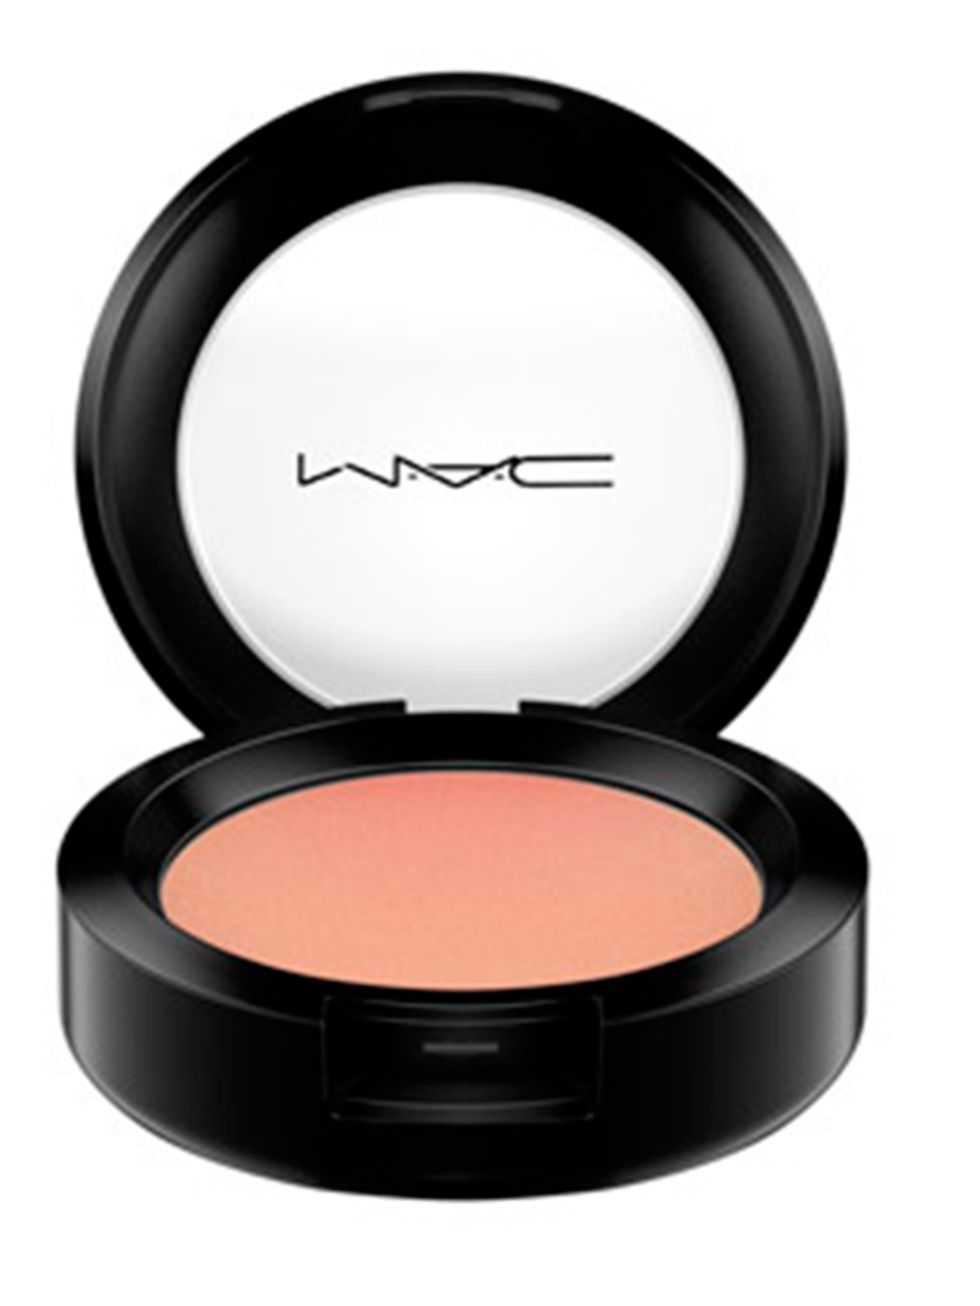 <p><a href="http://www.maccosmetics.co.uk/product/shaded/156/316/Products/Face/Cheek/Cream-Colour-Base/index.tmpl" target="_blank">MAC Cream Colour Base in Hush, £16</a></p>